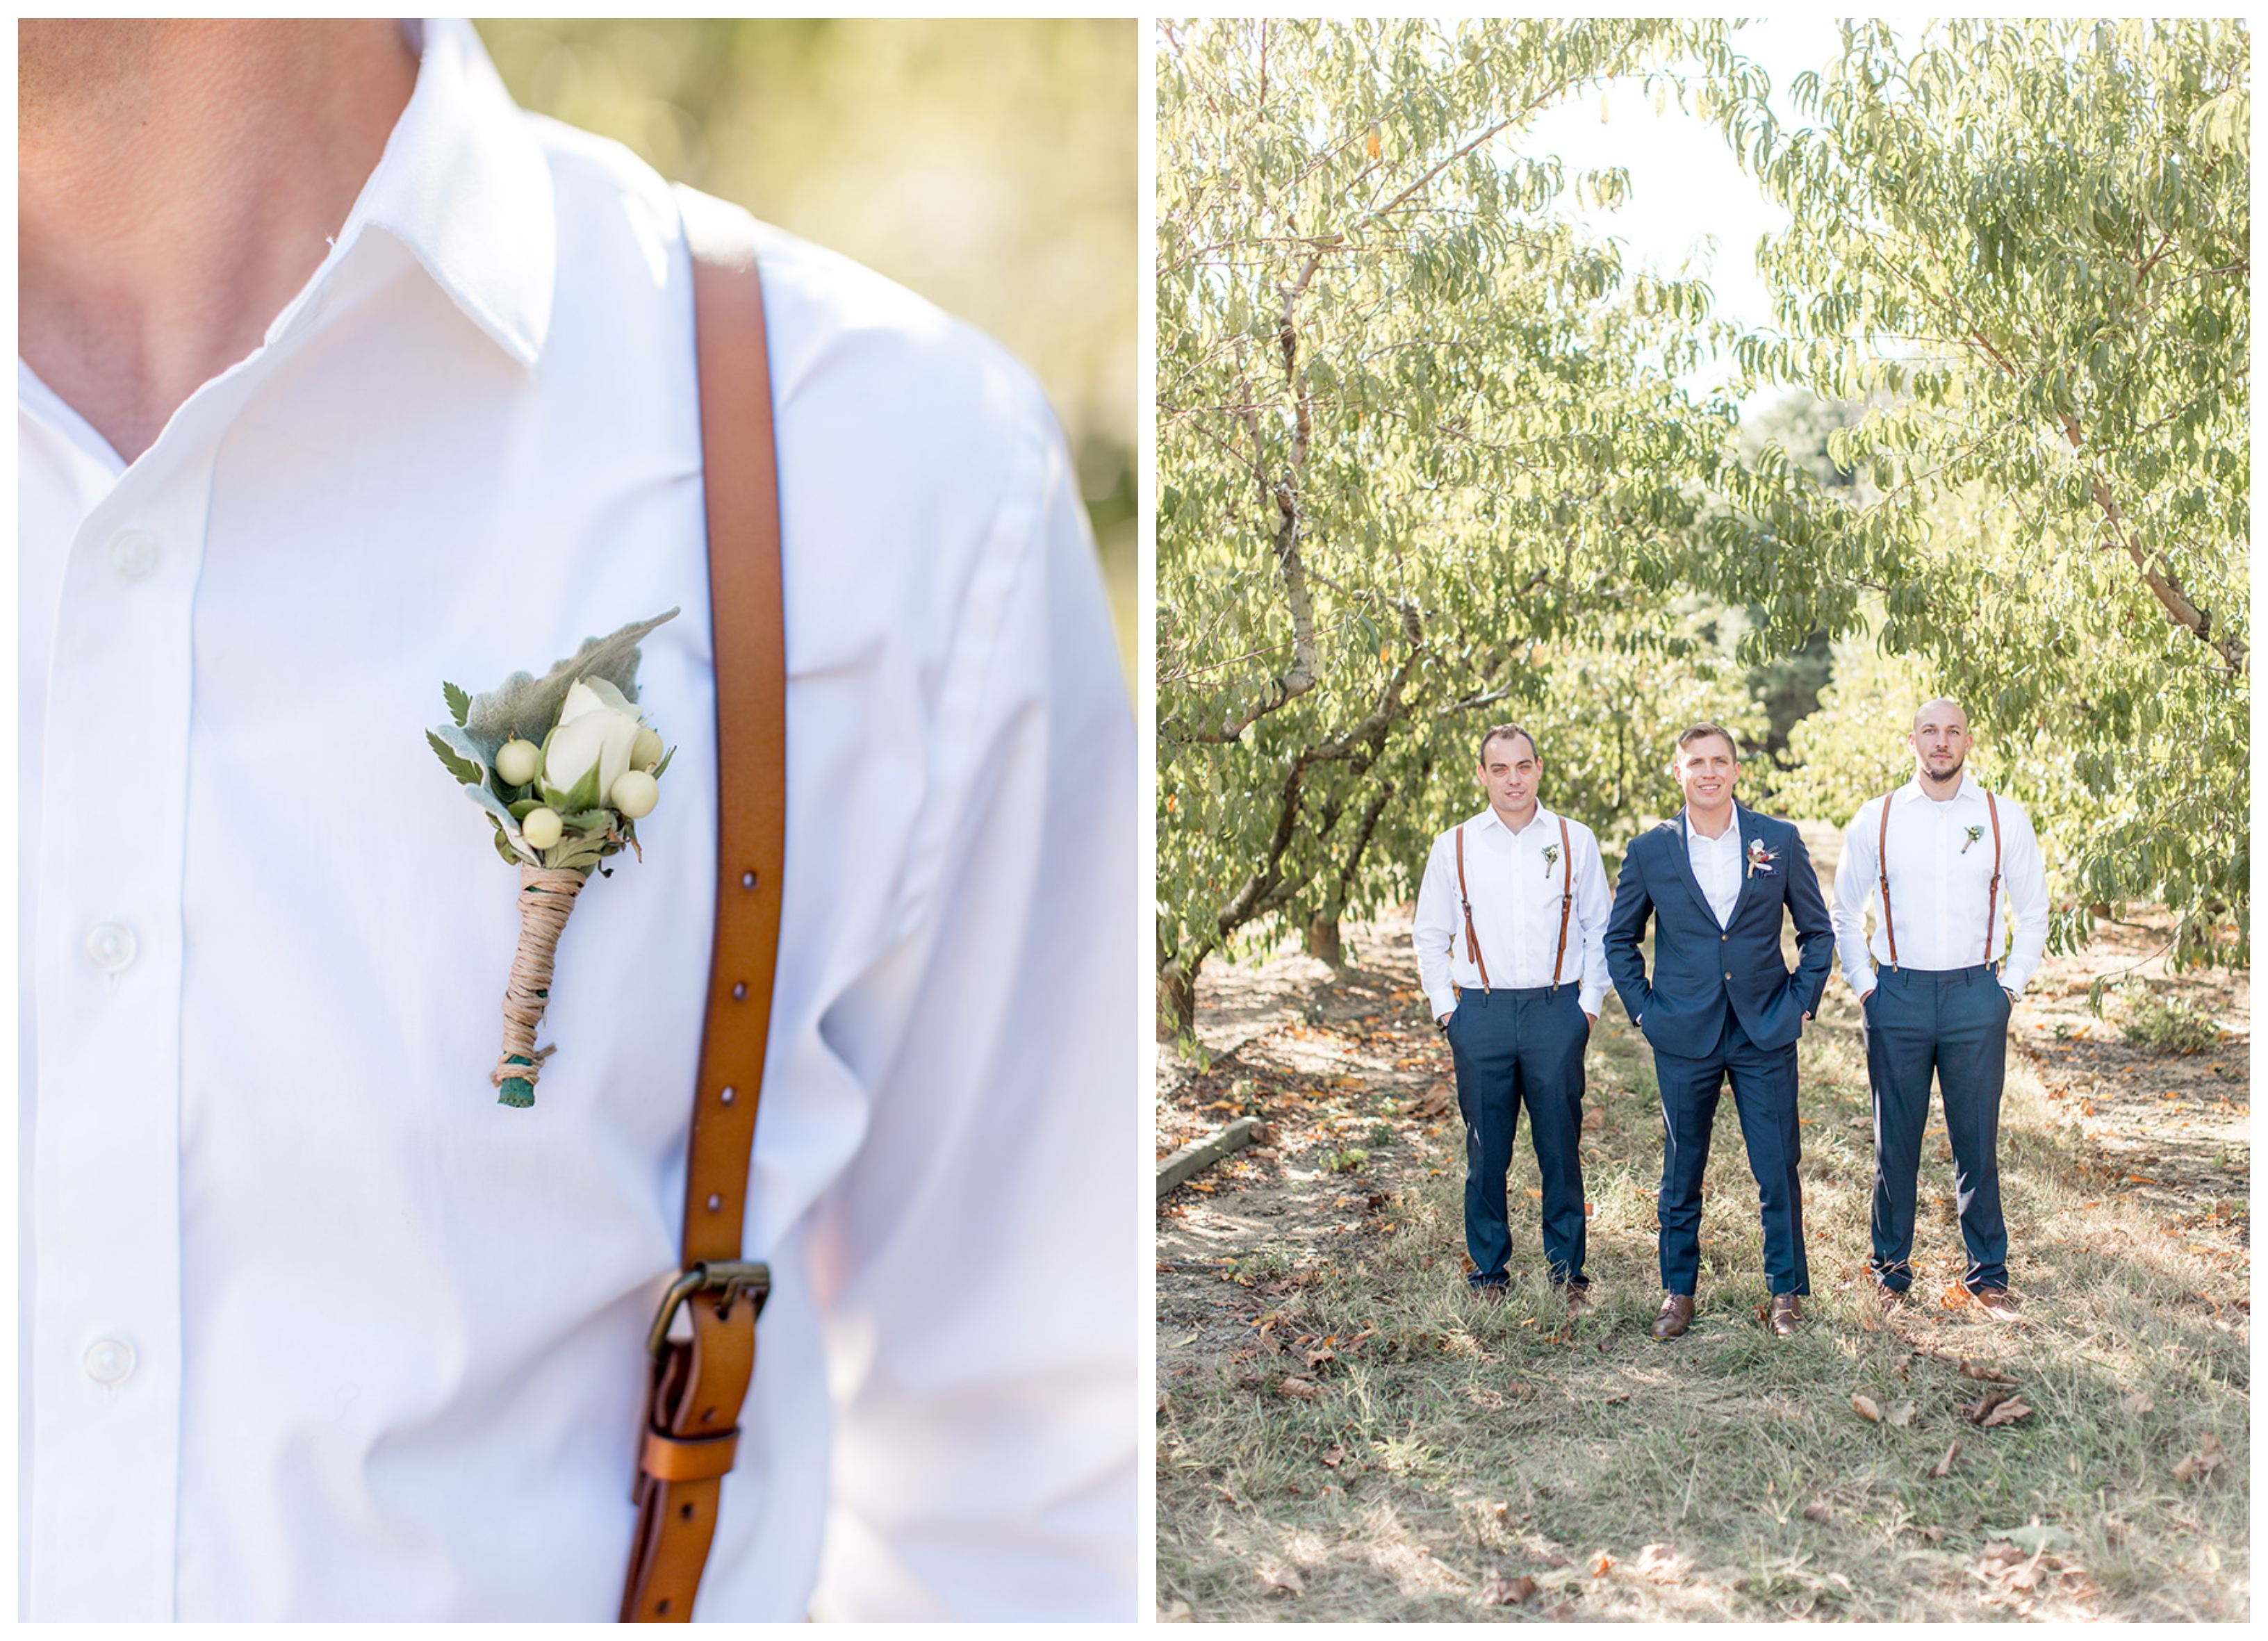 Groom and his groomsmen in blue with leather suspenders